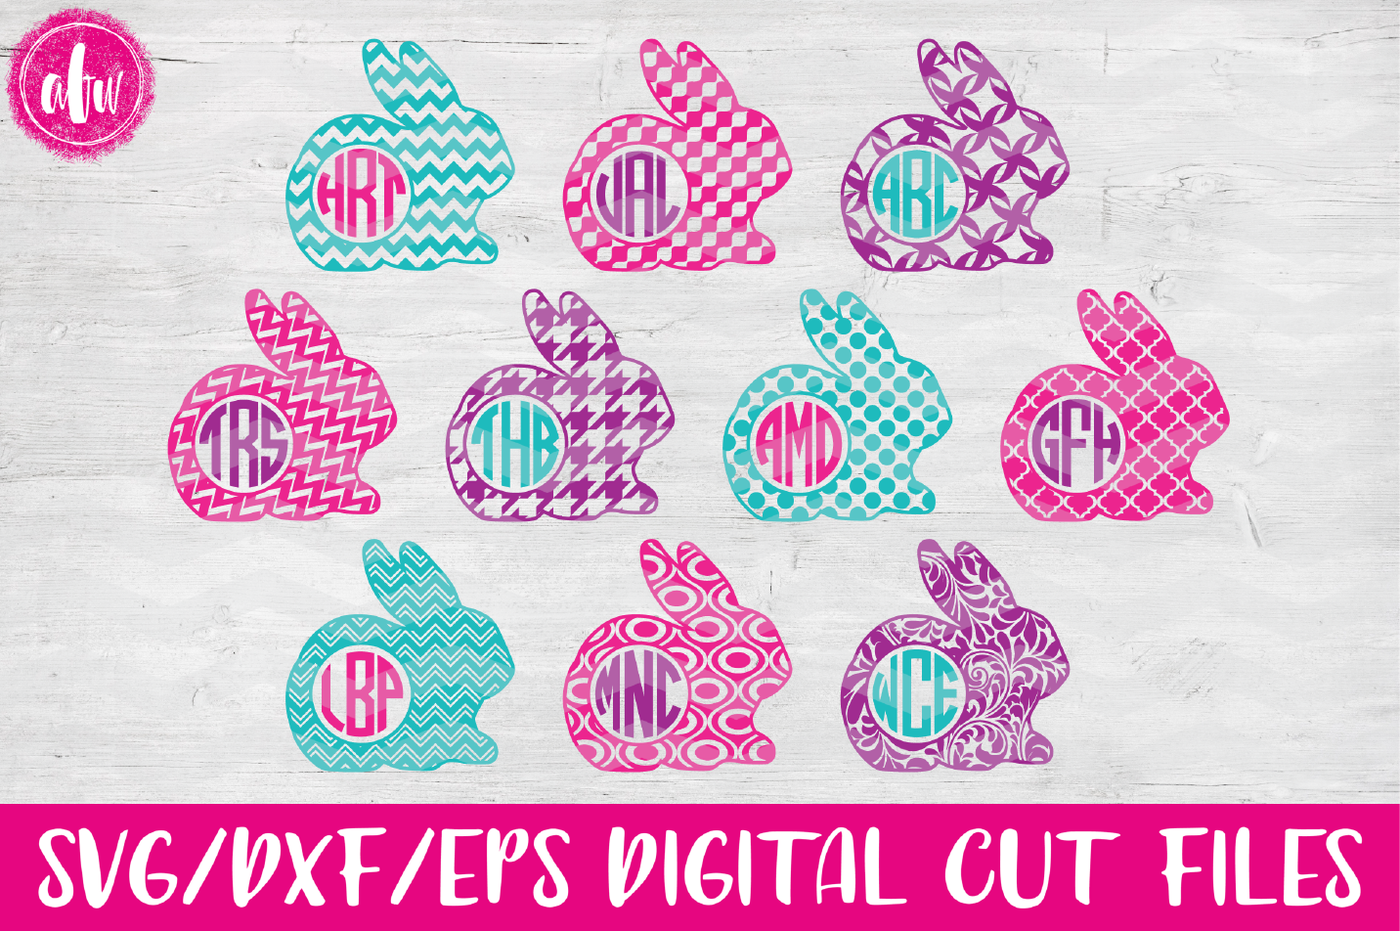 Download Monogram Pattern Bunny - SVG, DXF, EPS Cut Files By AFW ...